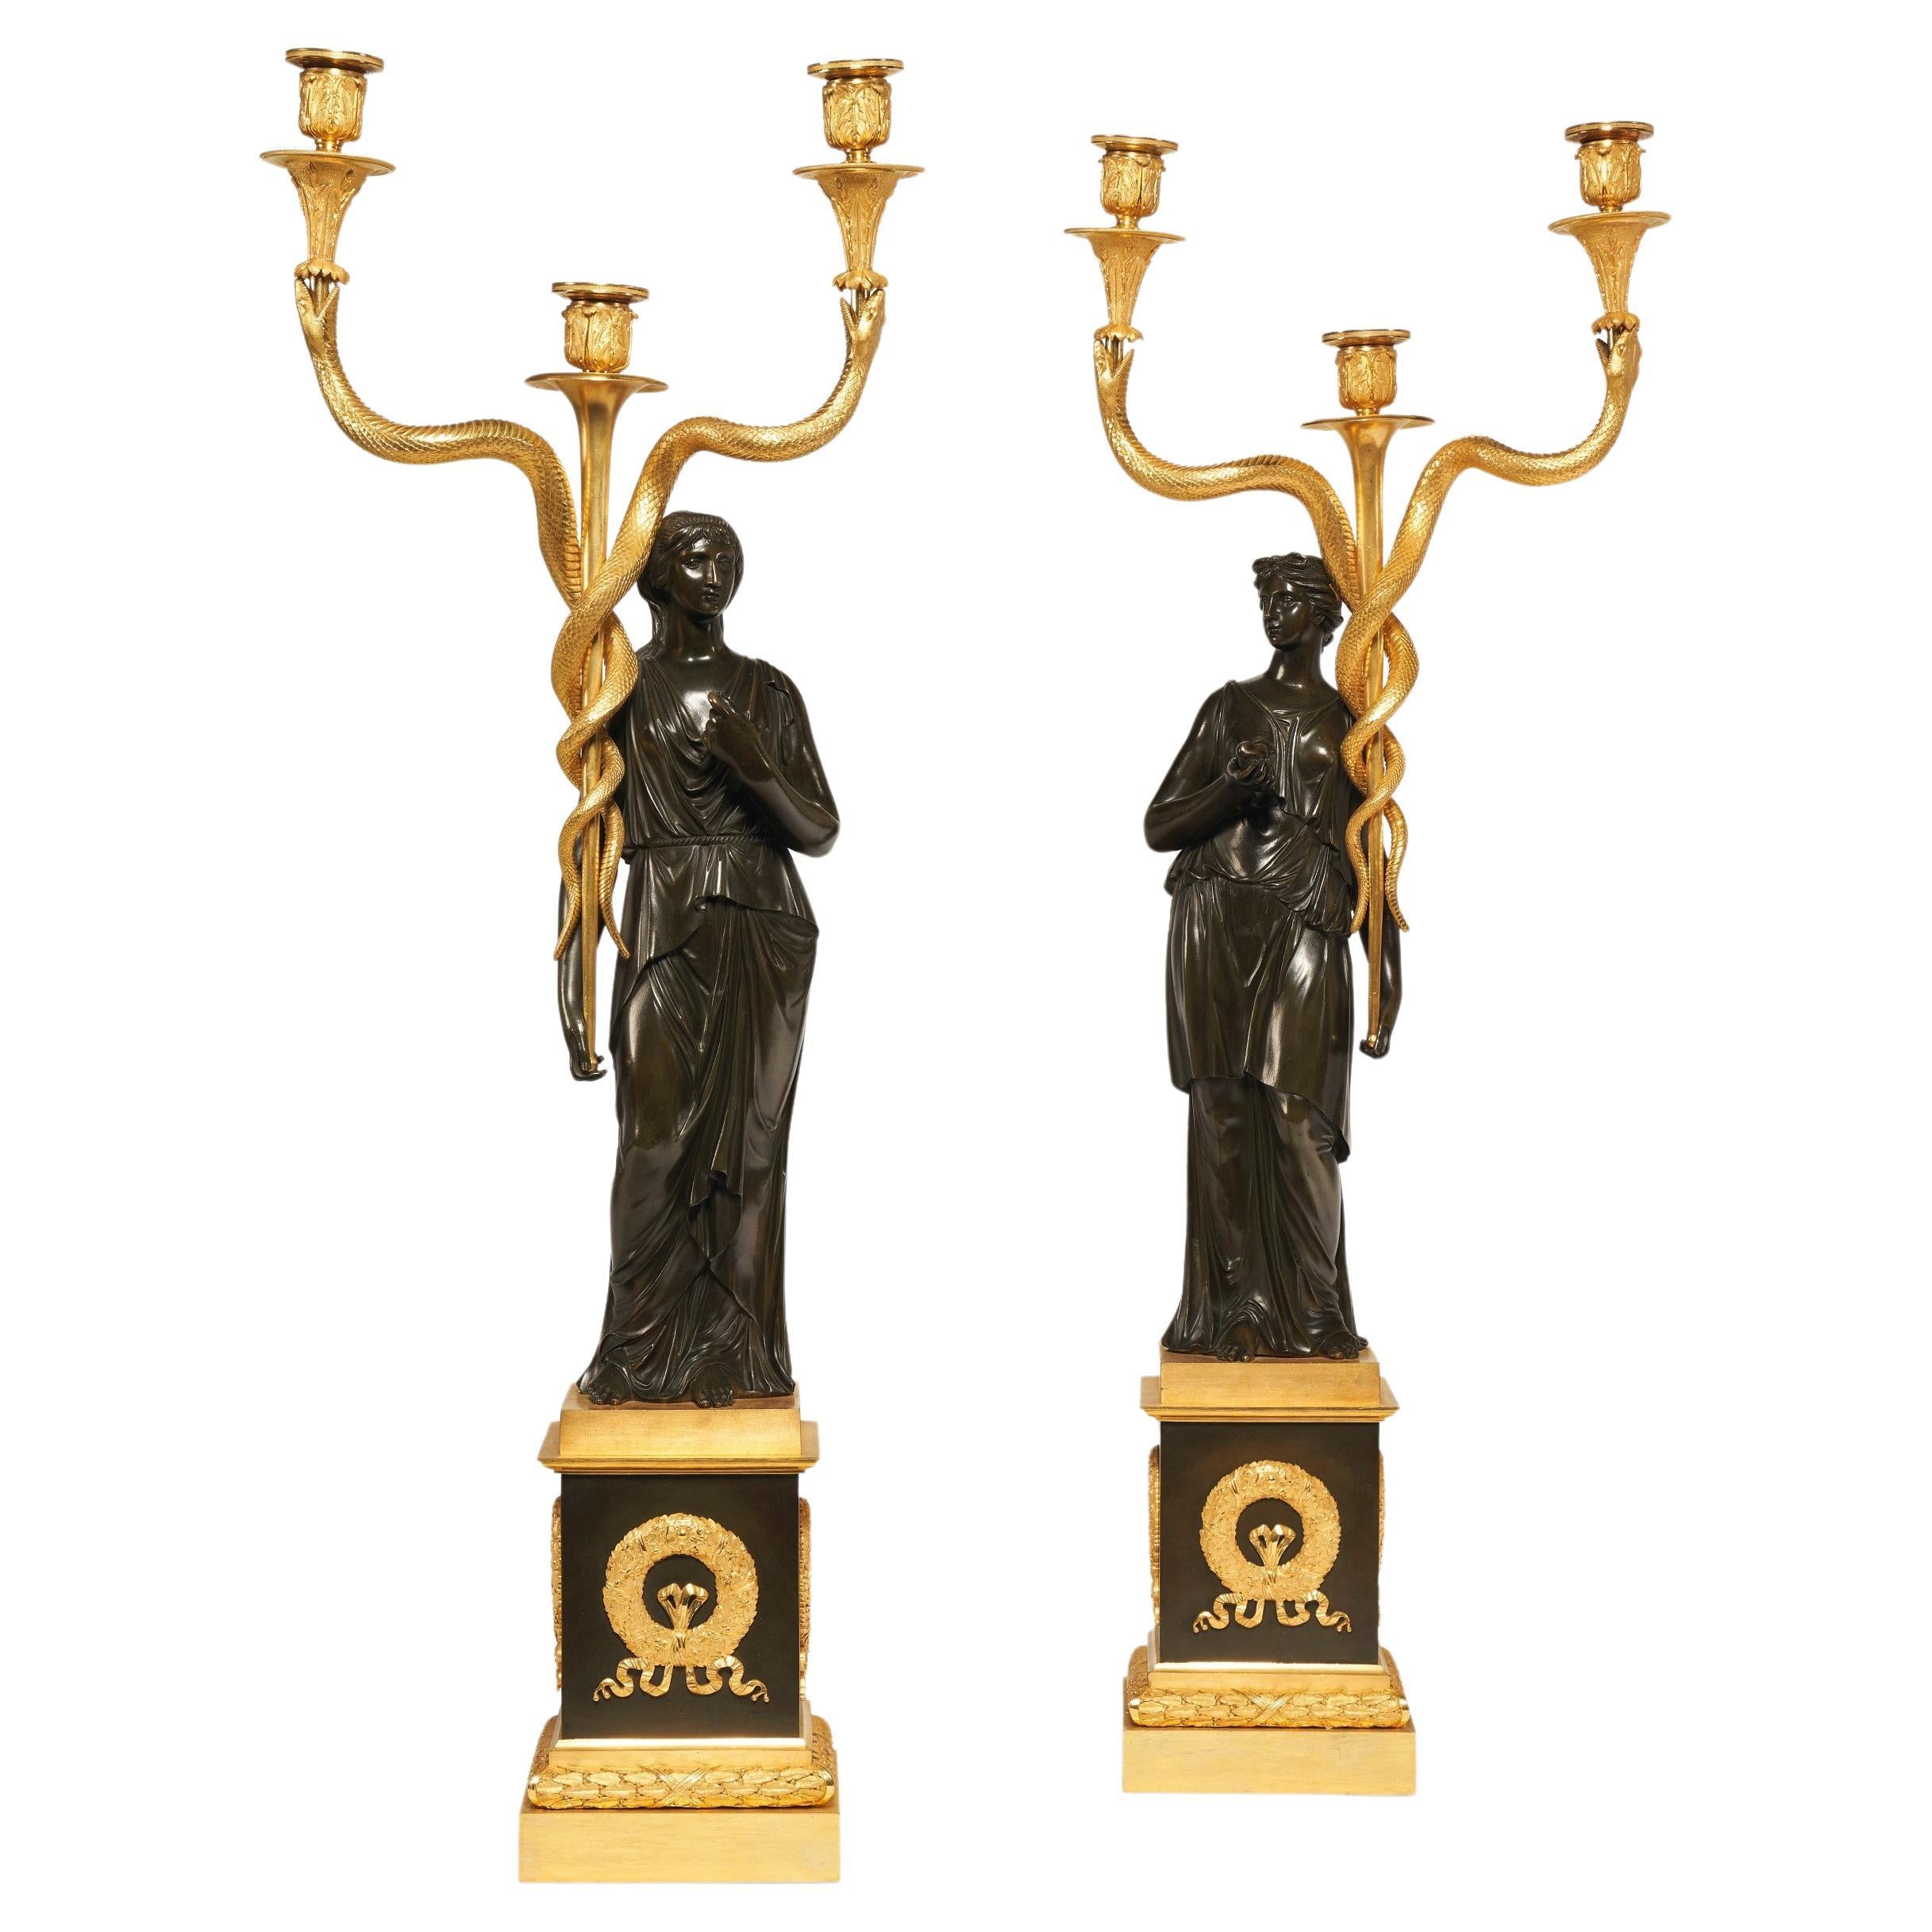 Empire Revival Candle Holders